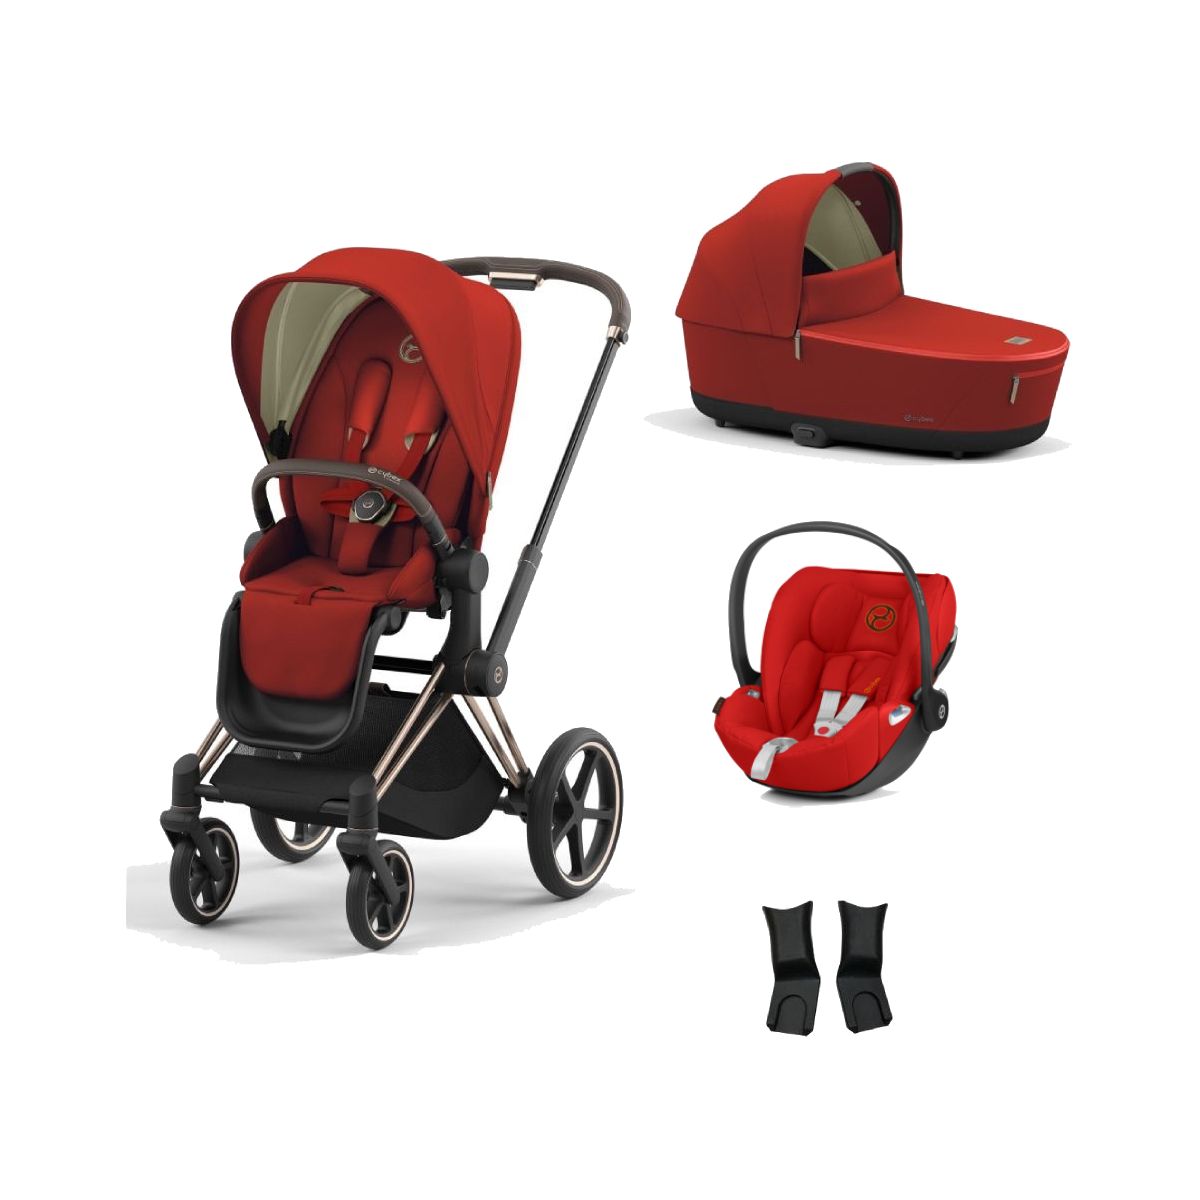 Cybex Priam Rose Gold Pushchair with Lux Carry Cot & Cloud Z Car Seat